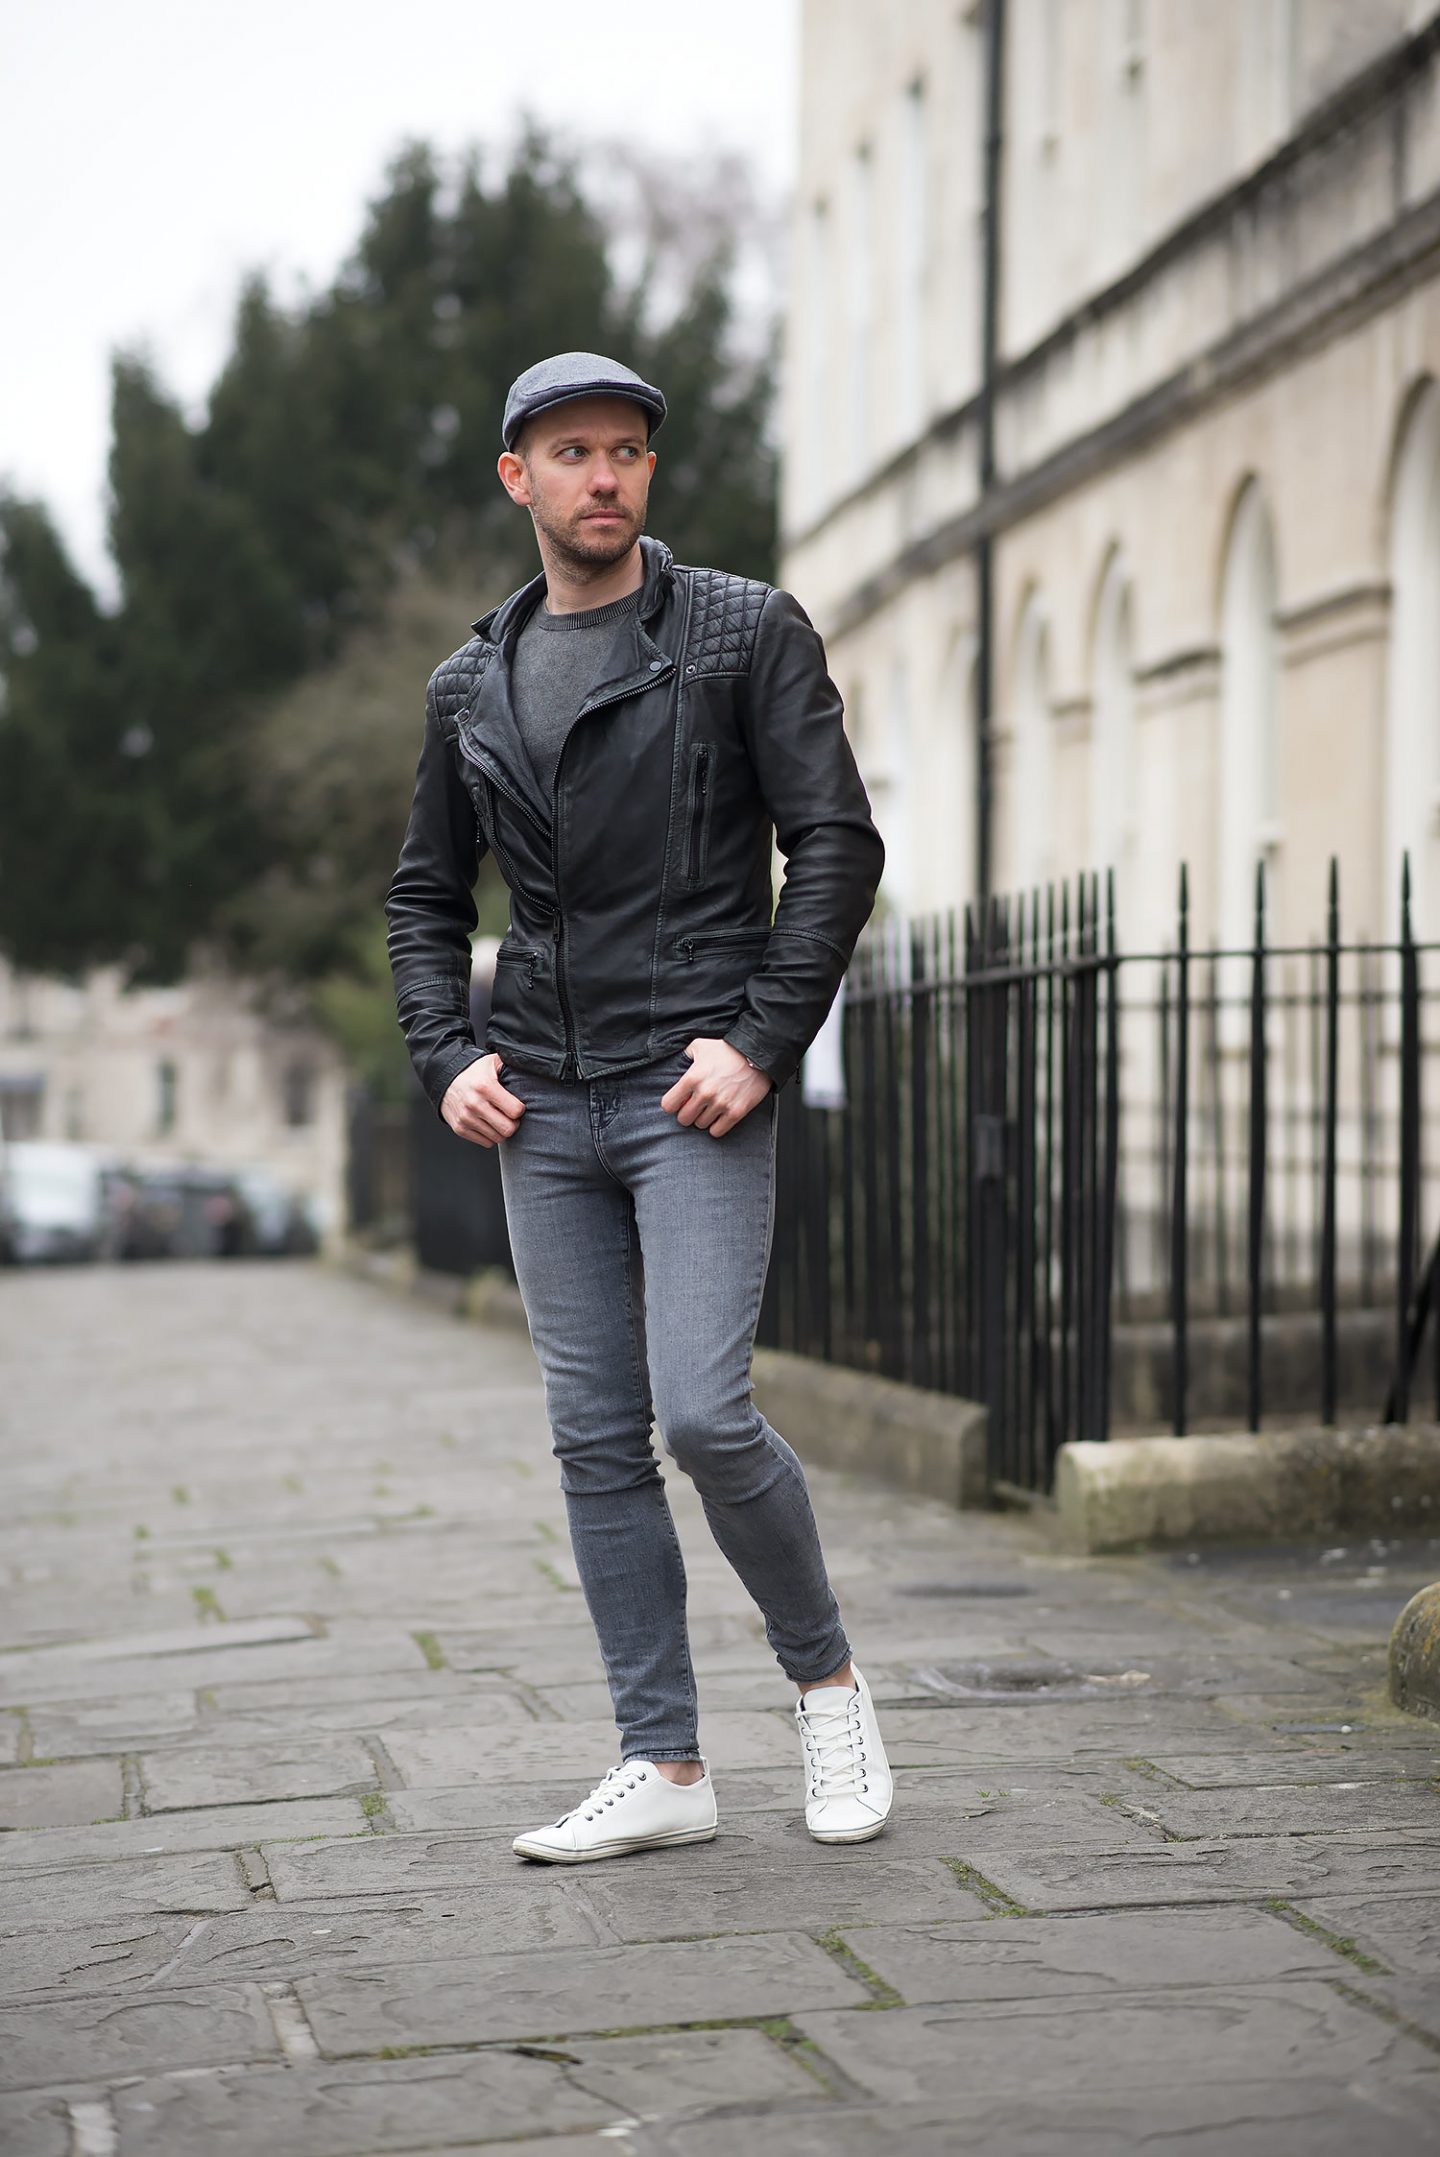 Allsaints Cargo Biker Leather Jacket And Flat Cap Outfit - Your Average Guy